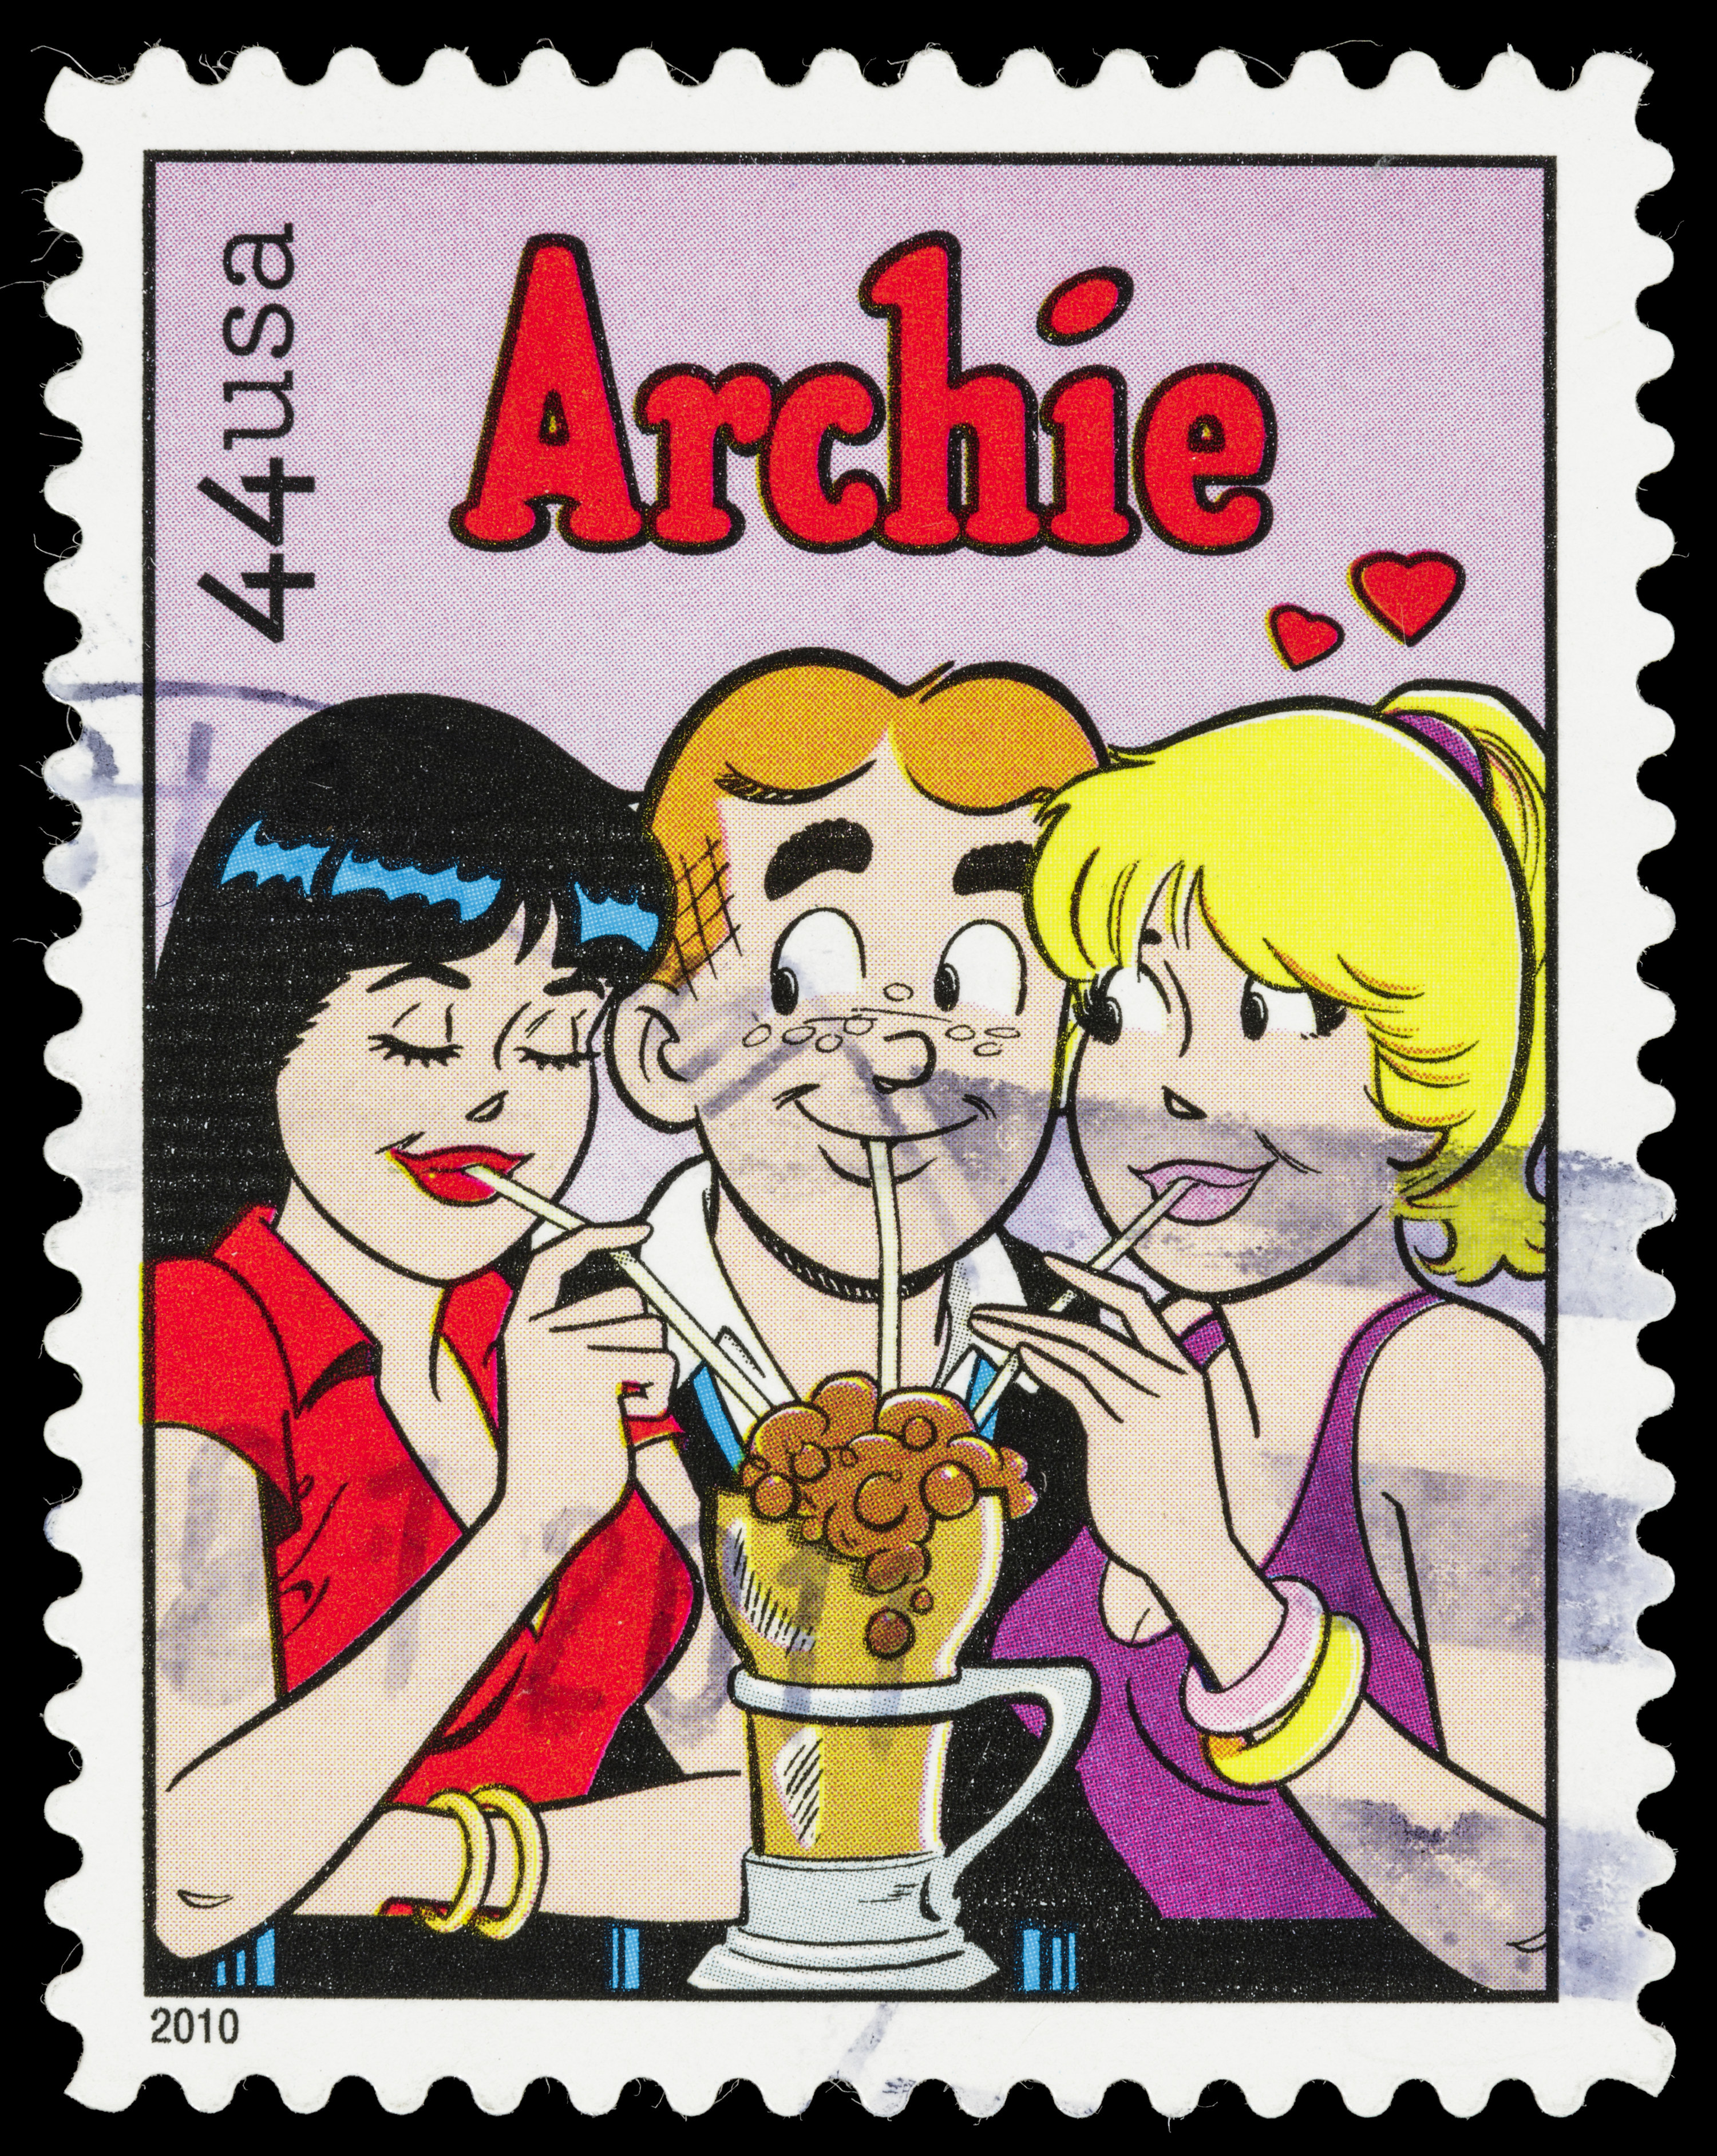 Archie, Veronica and Betty on a stamp